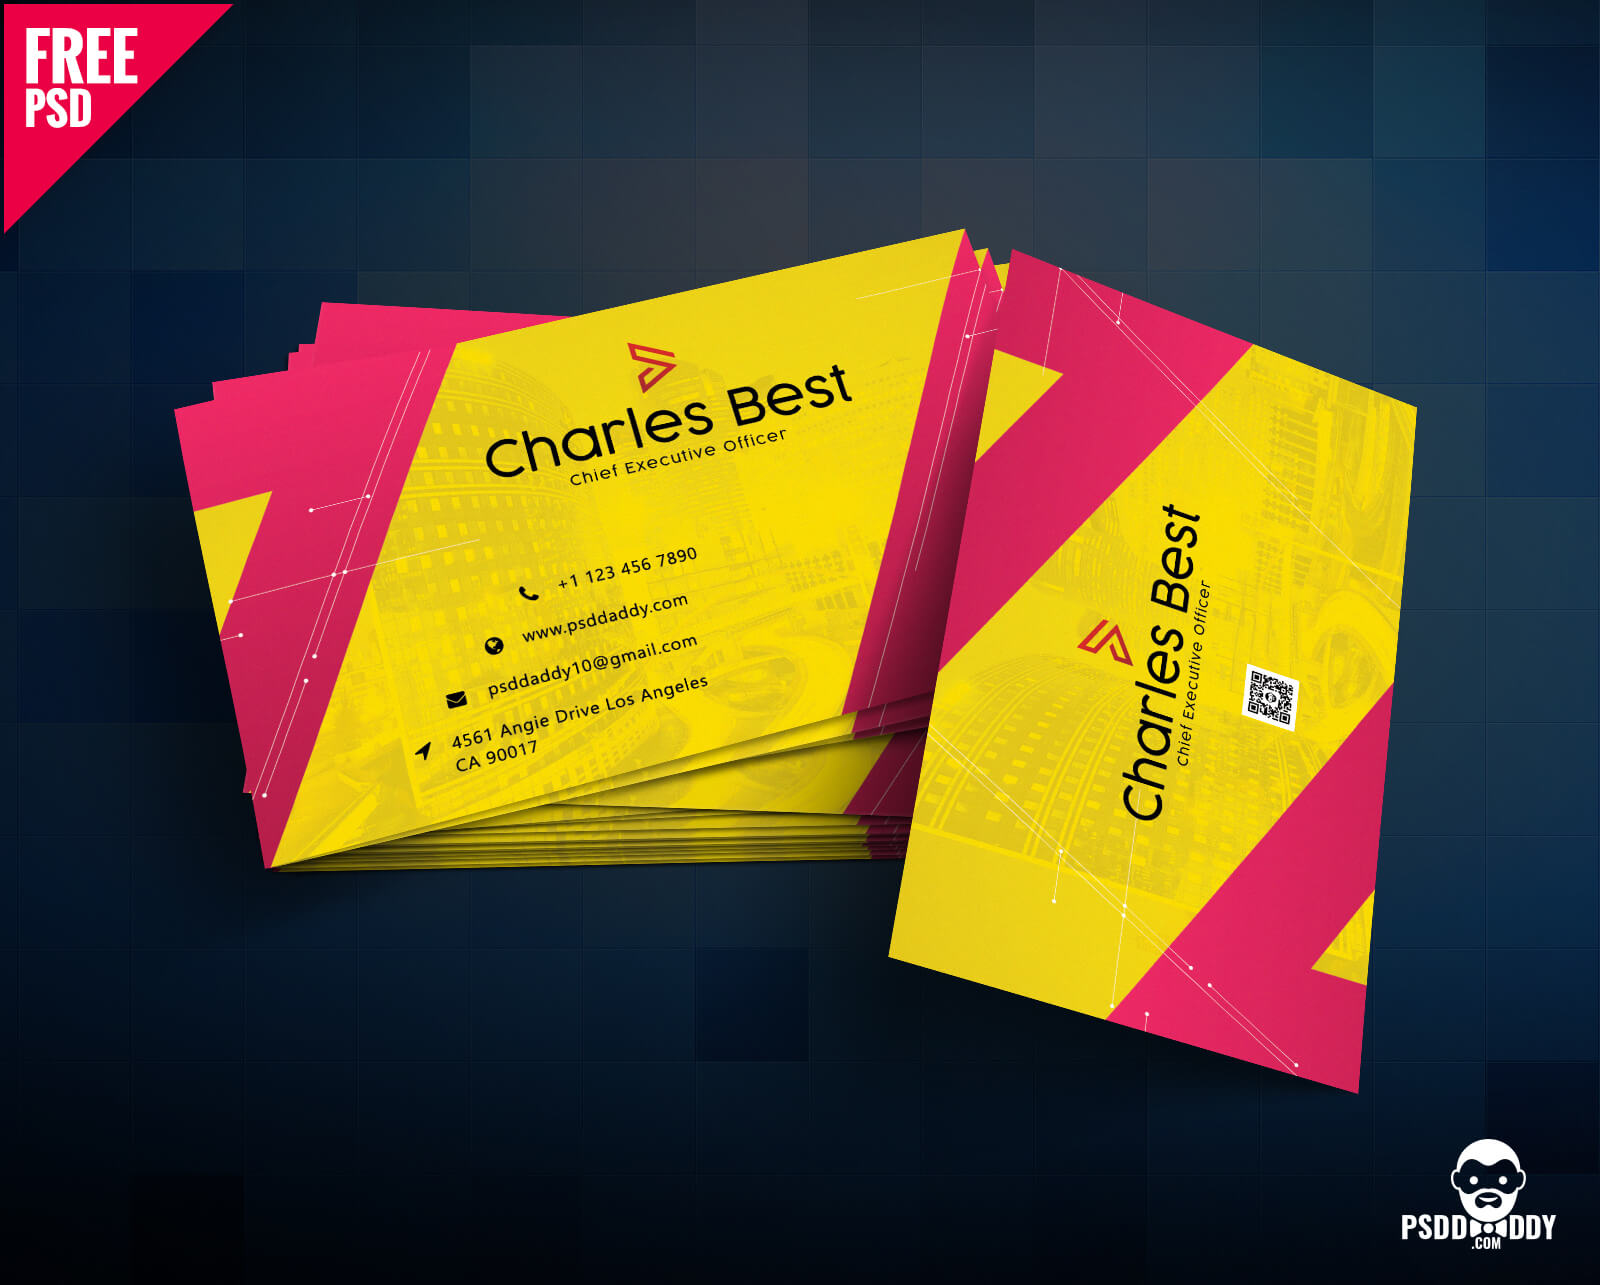 Download] Creative Business Card Free Psd | Psddaddy Inside Photoshop Name Card Template